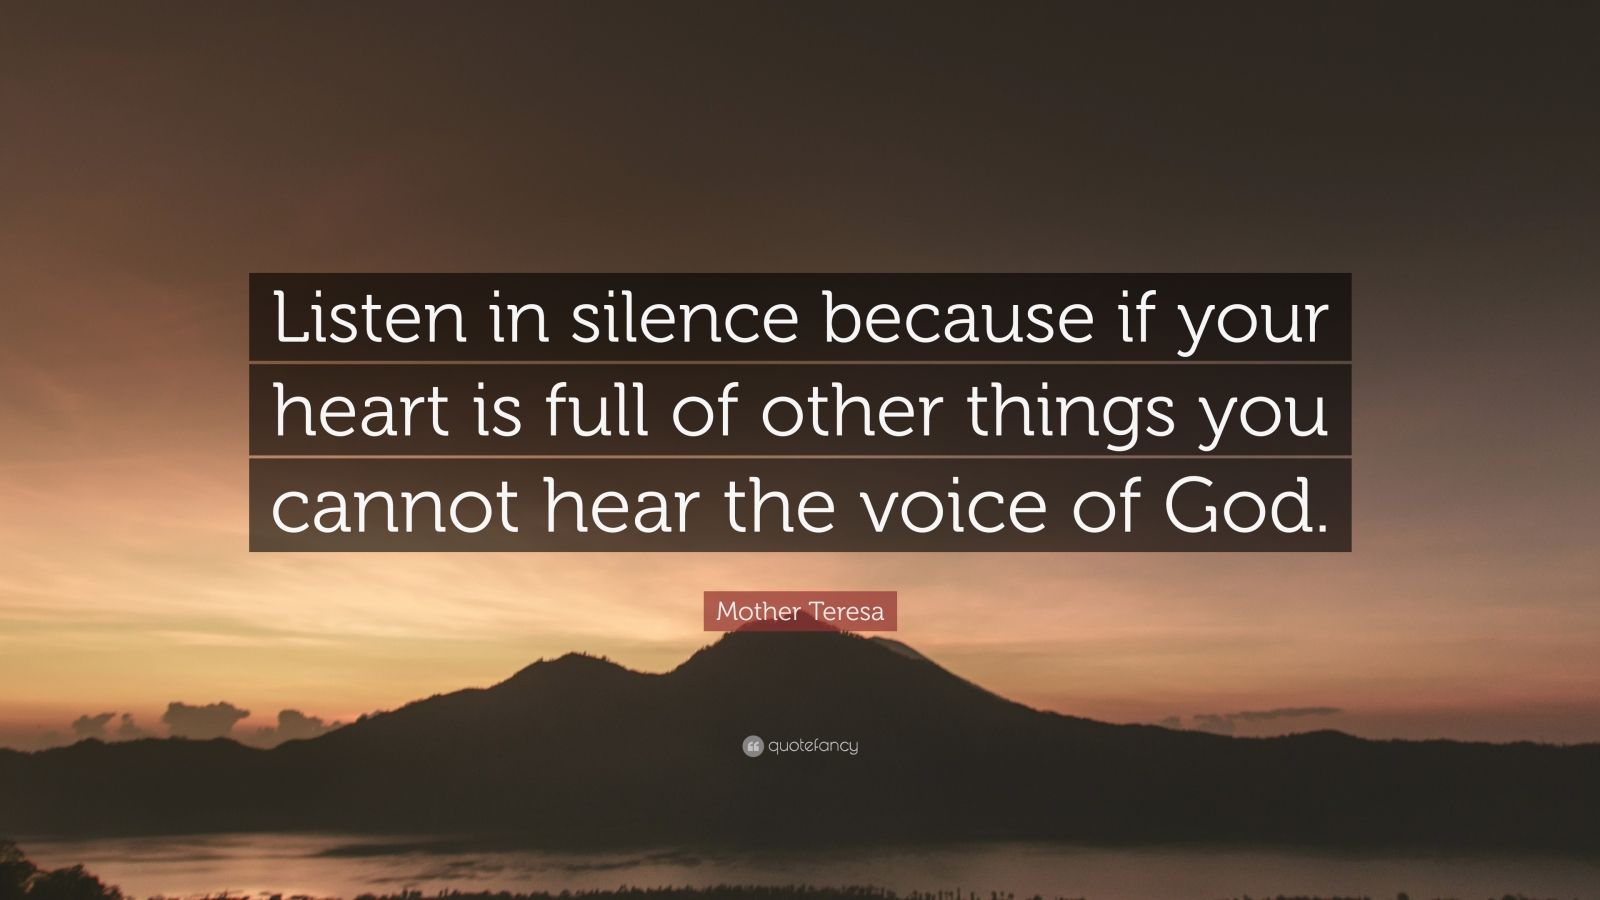 Mother Teresa Quote: “Listen in silence because if your heart is full ...